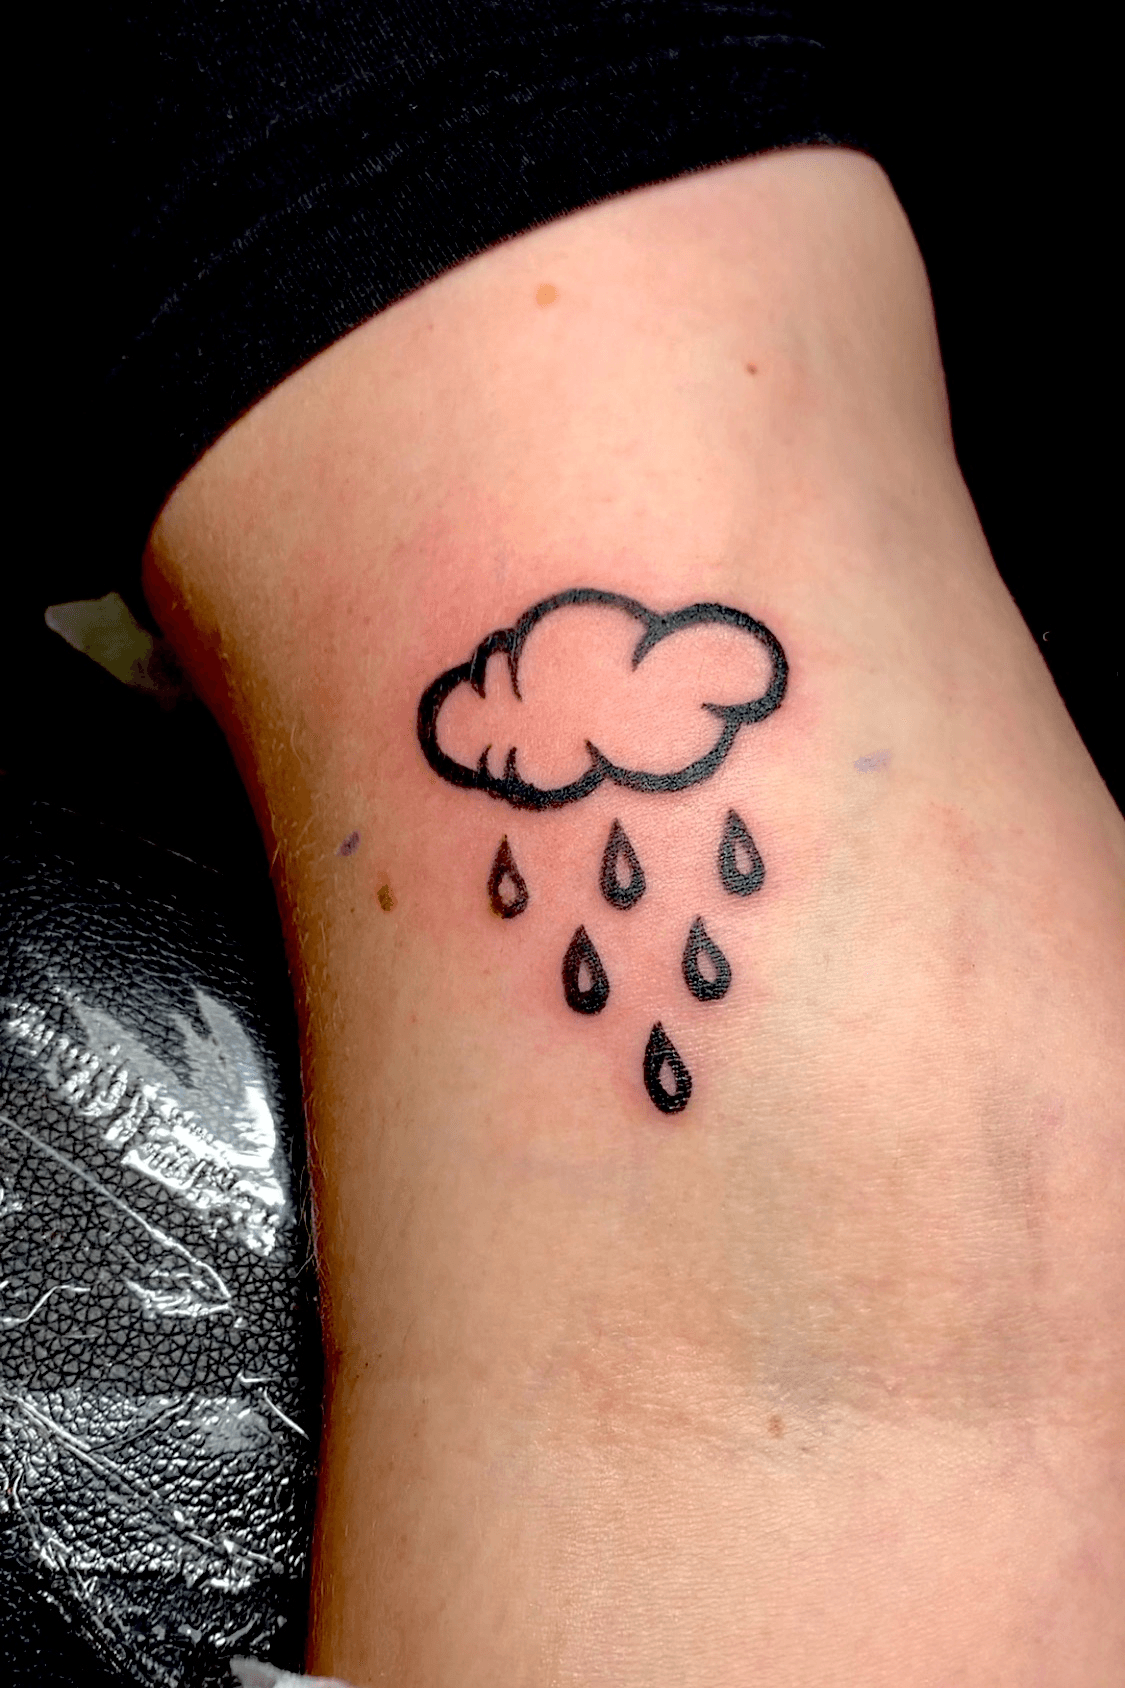 60 Best Cloud Tattoos from Dark and Thundering to Bright and Hopeful   Meanings Ideas and Designs  Cloud tattoo Rain cloud tattoos Jewerly  tattoo